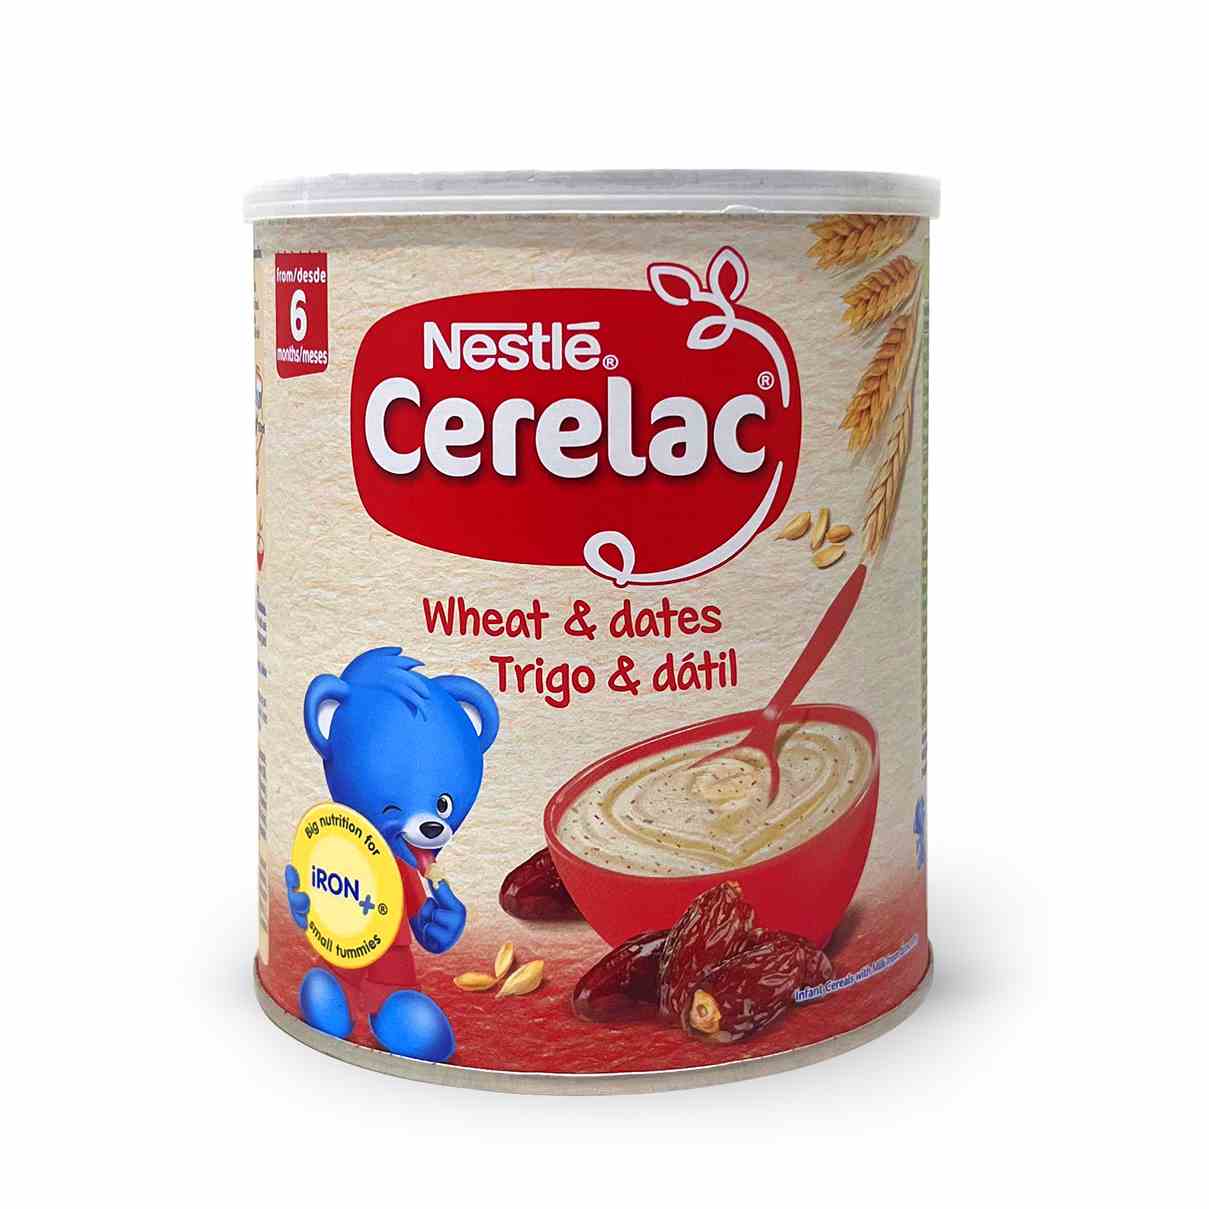 Buy Nestle Cerelac with Wheat & Dates - 400gms Online in India at uyyaala.com